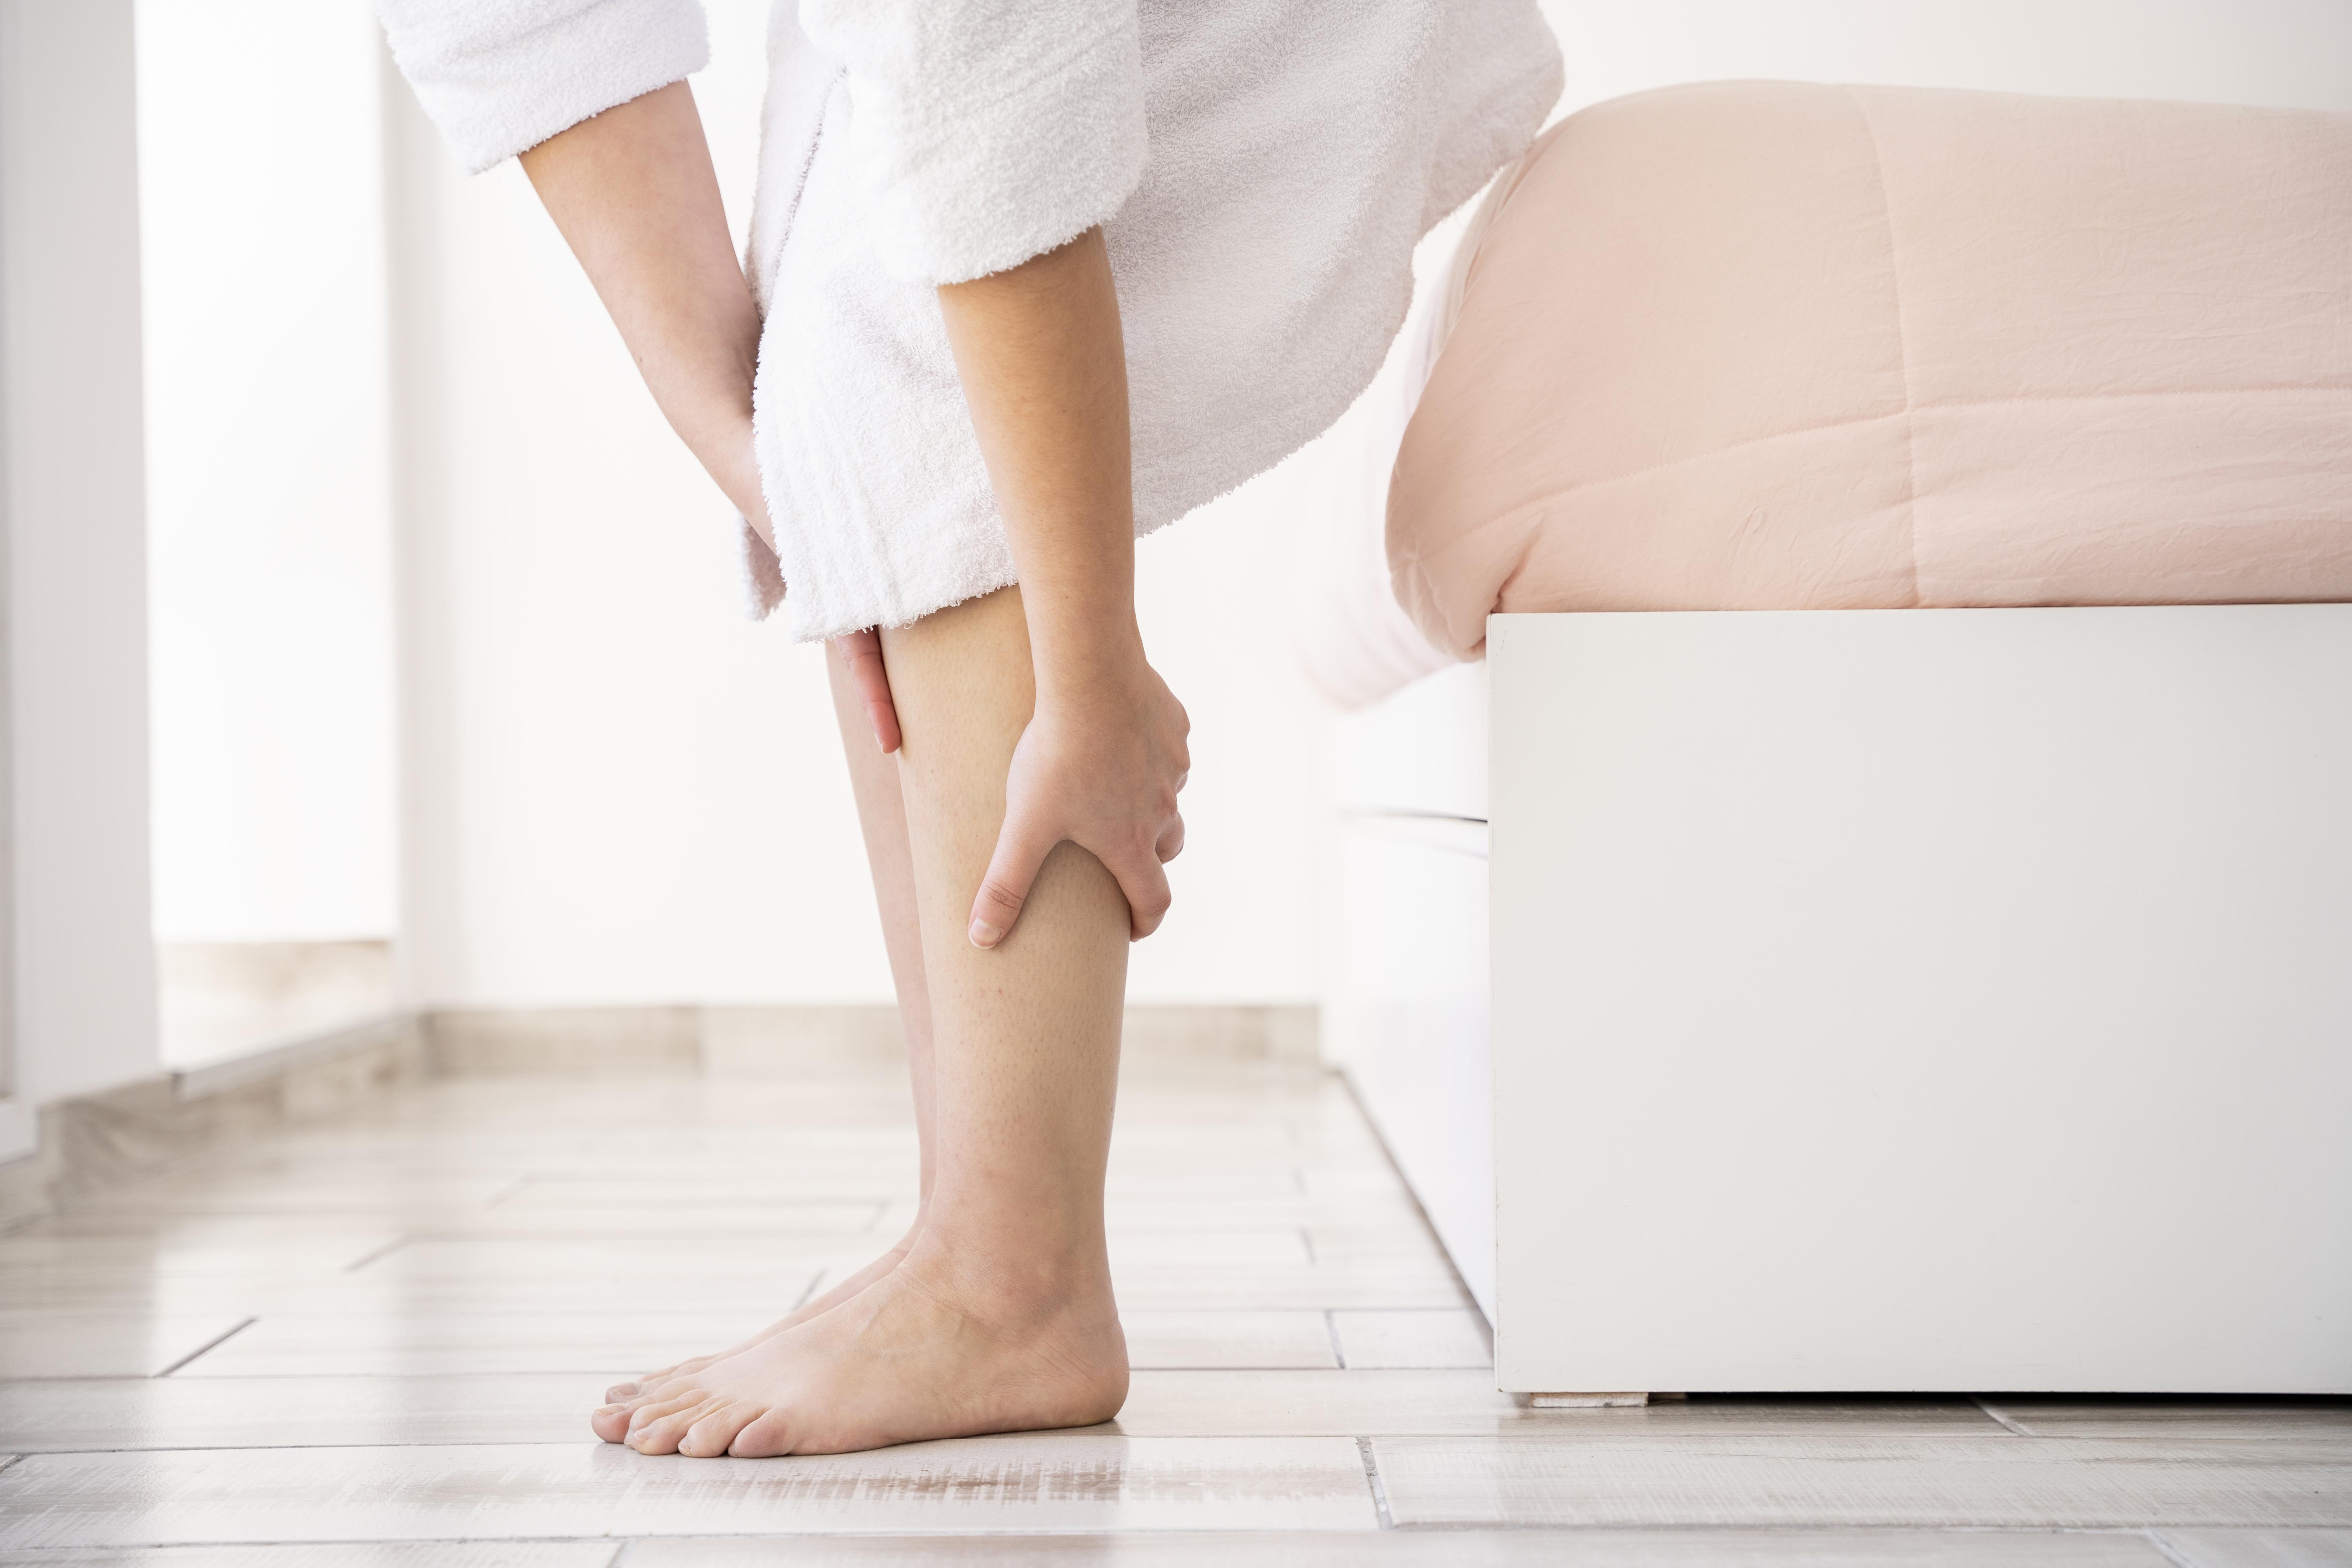 Foot and Ankle Swelling: Common Causes and When to Seek Help